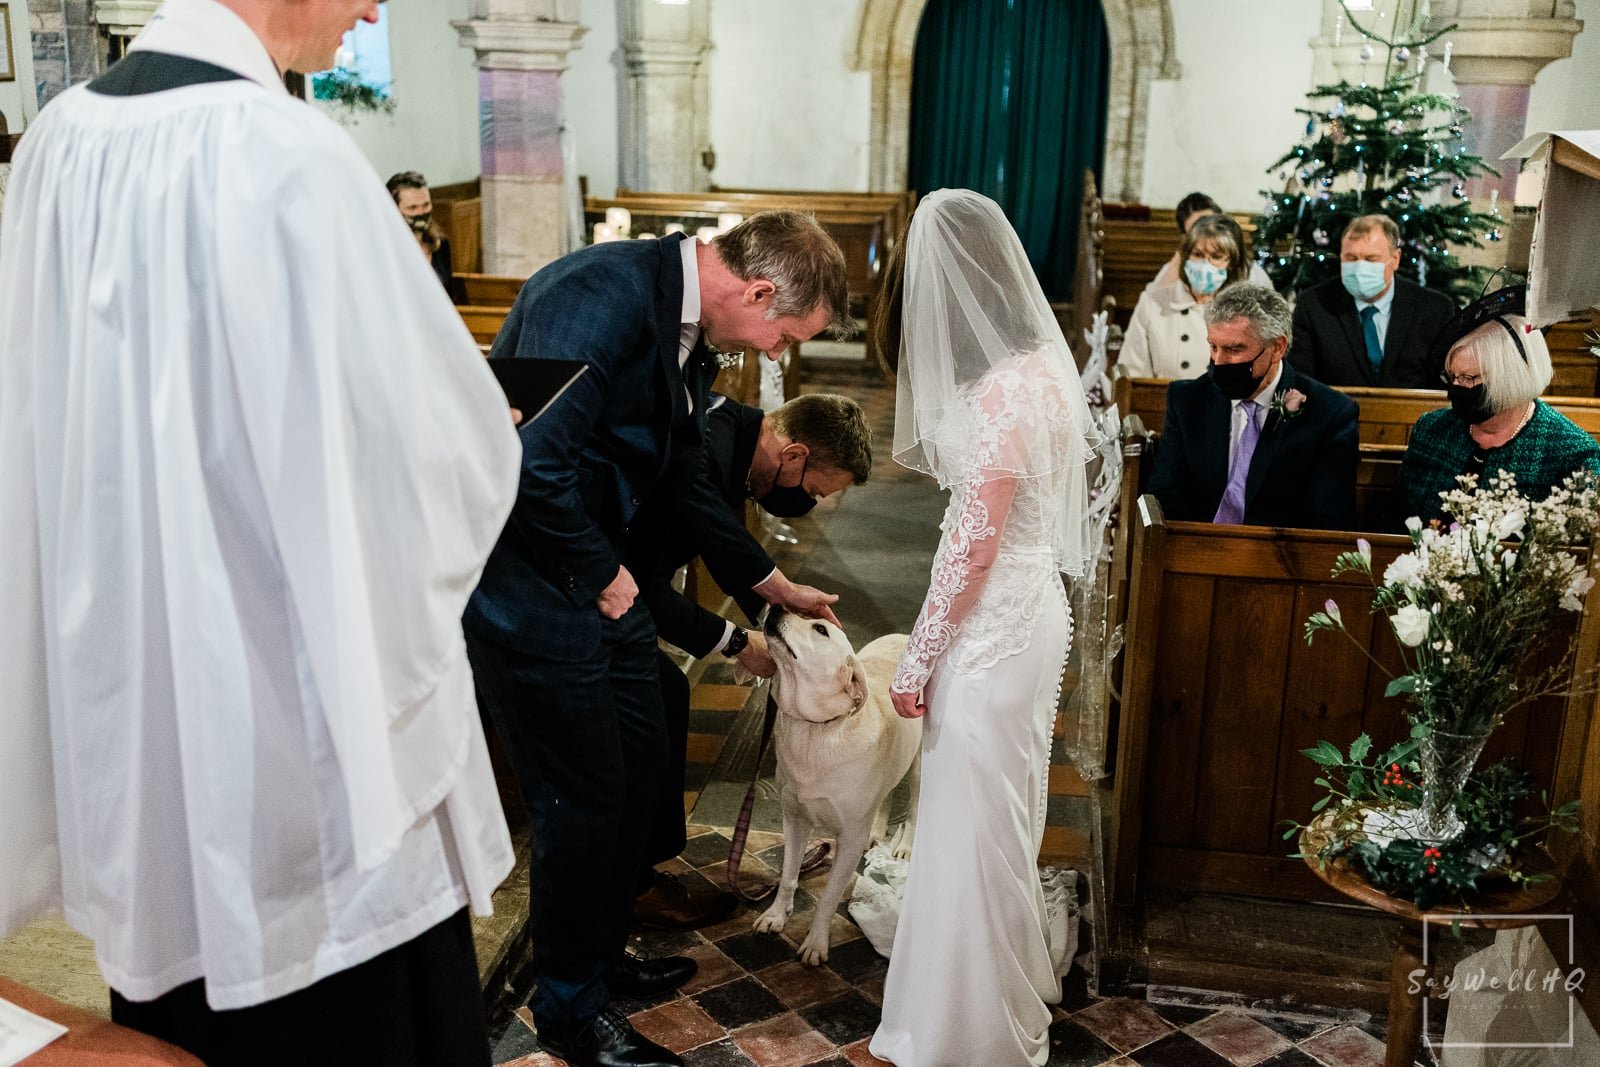 Vale of Belvoir Wedding Photography - dog ring bearer delivering the wedding rings to the bride and groom